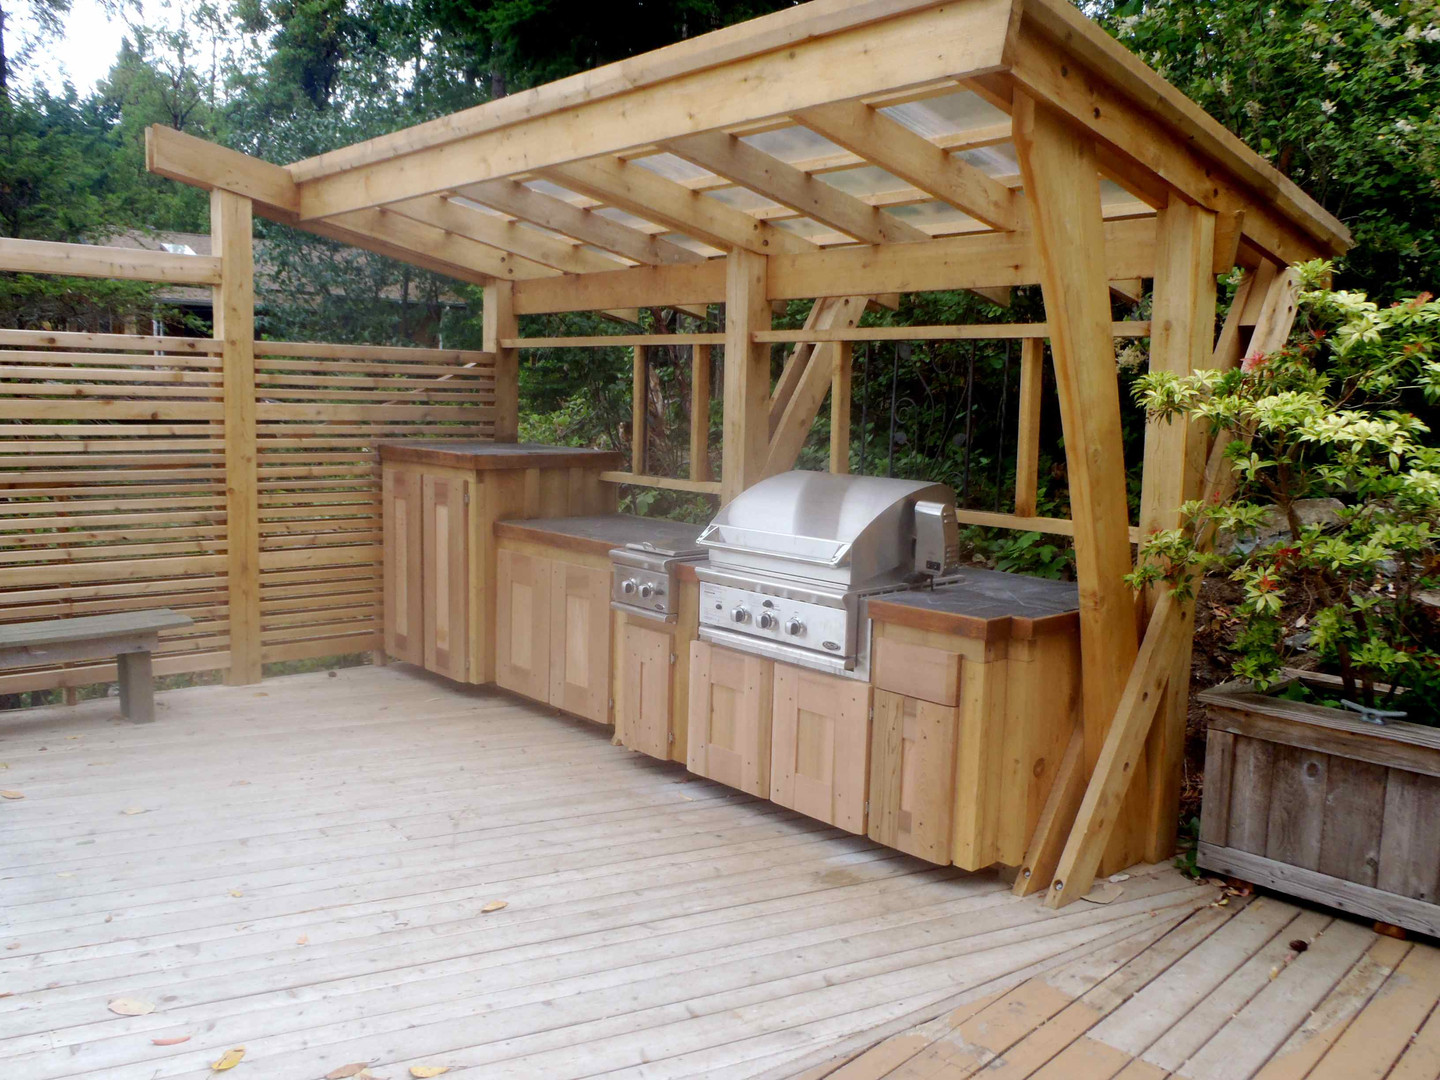 Diy Outdoor Kitchen Plans
 These DIY Outdoor Kitchen Plans Turn Your Backyard Into